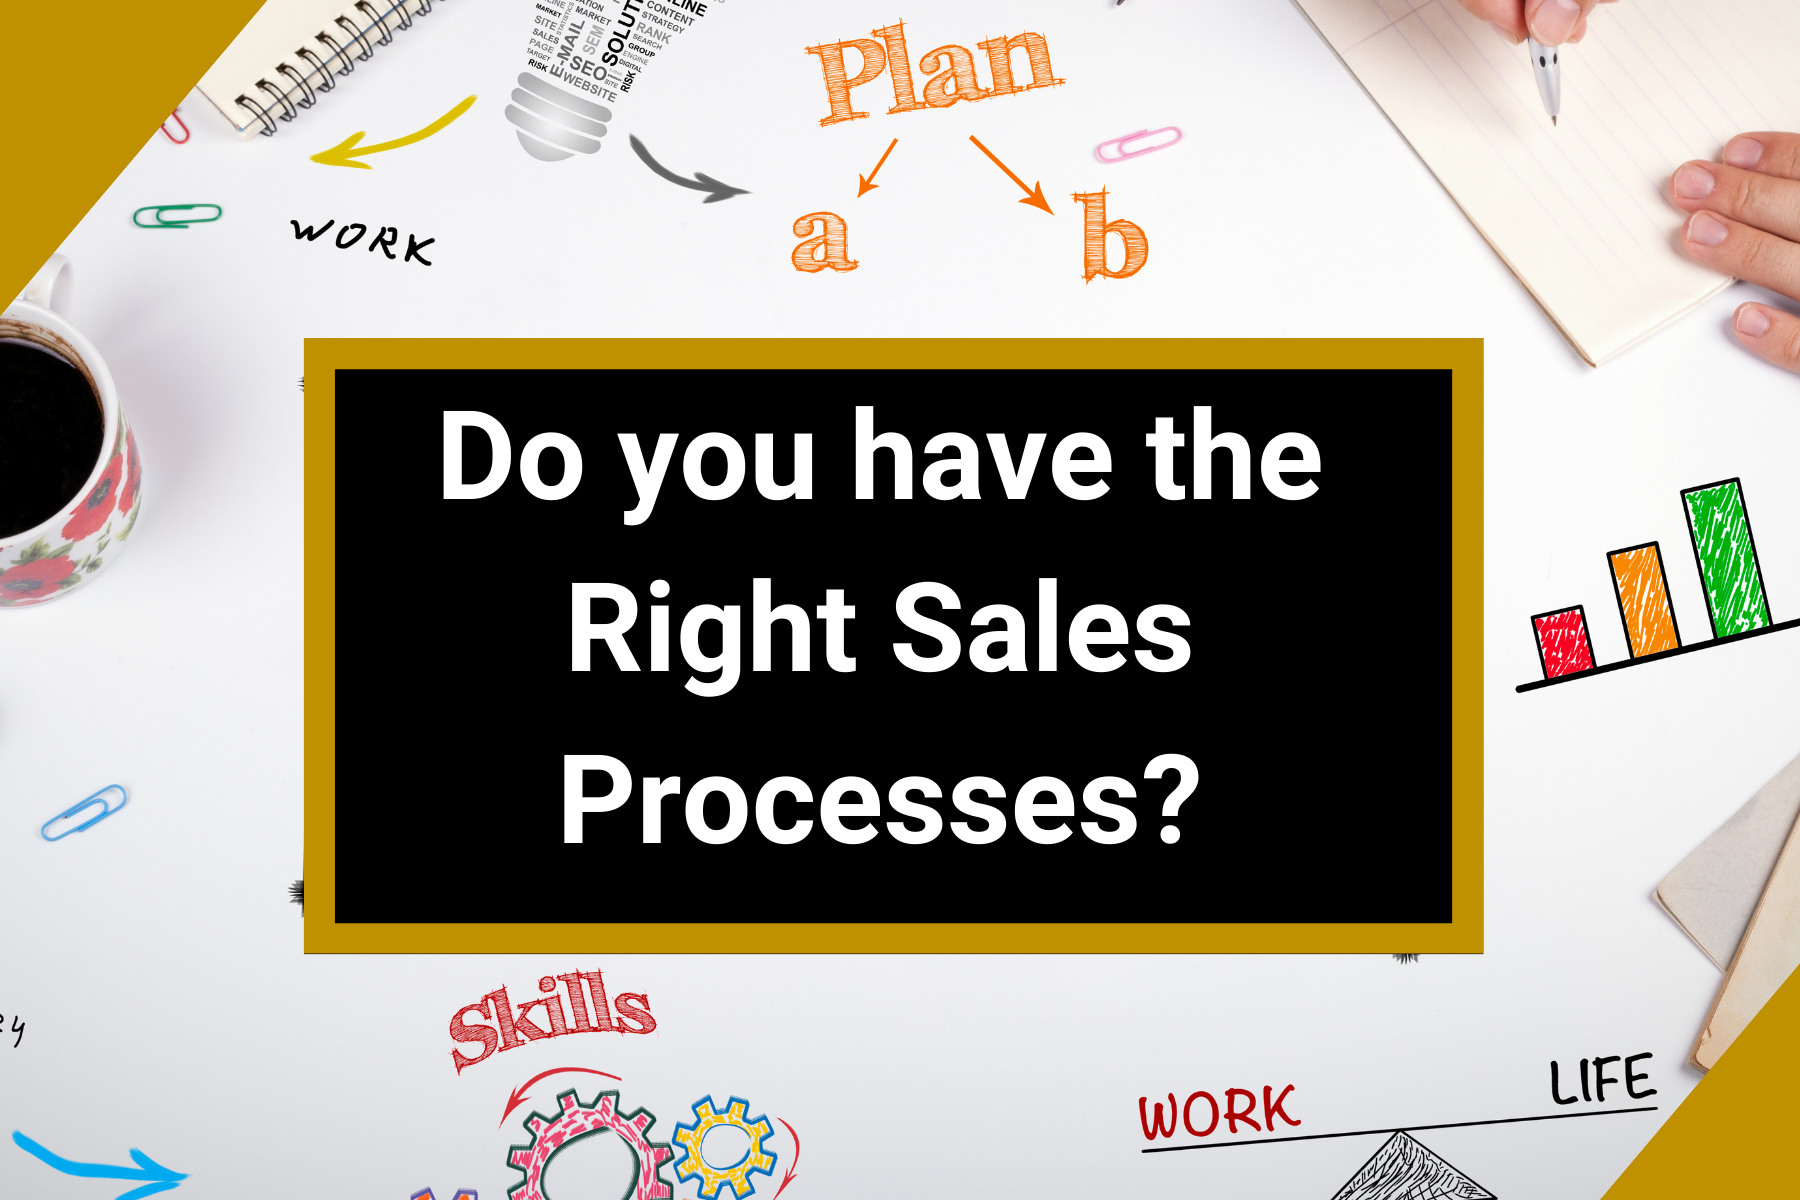 Do you have the Right Sales Processes?